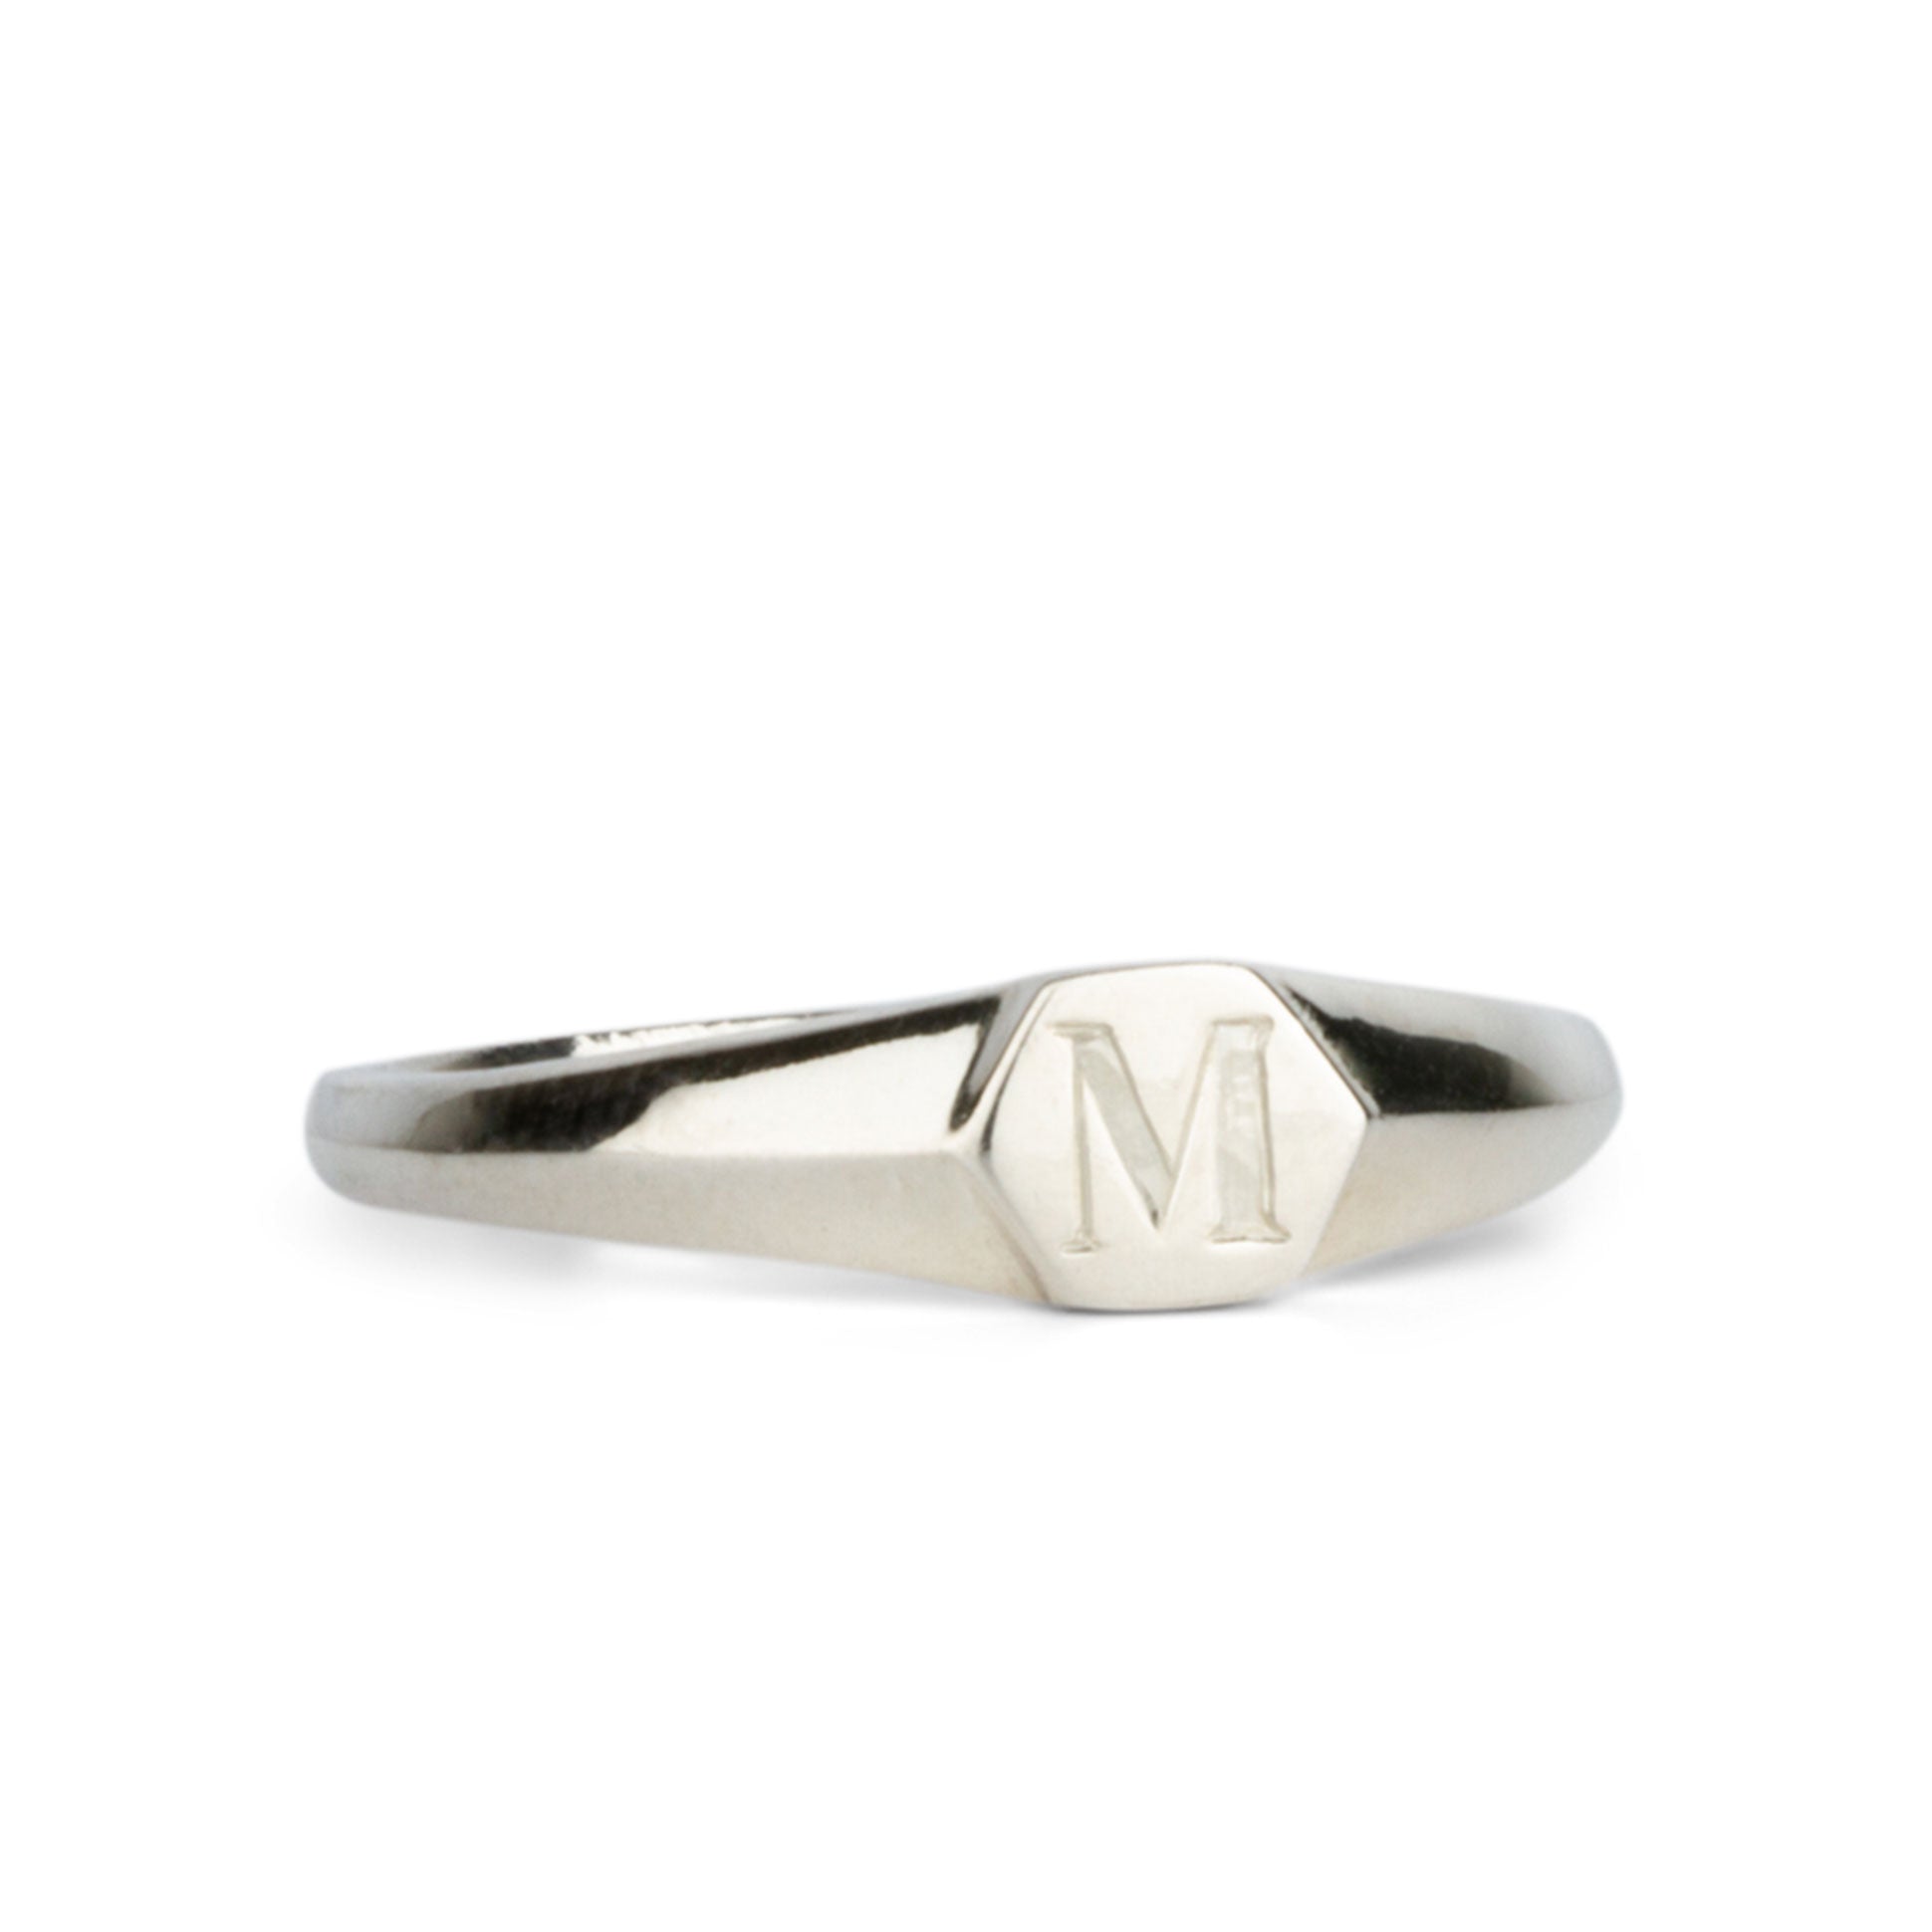 Astra Silver Signet Ring with Engraved Block Letter